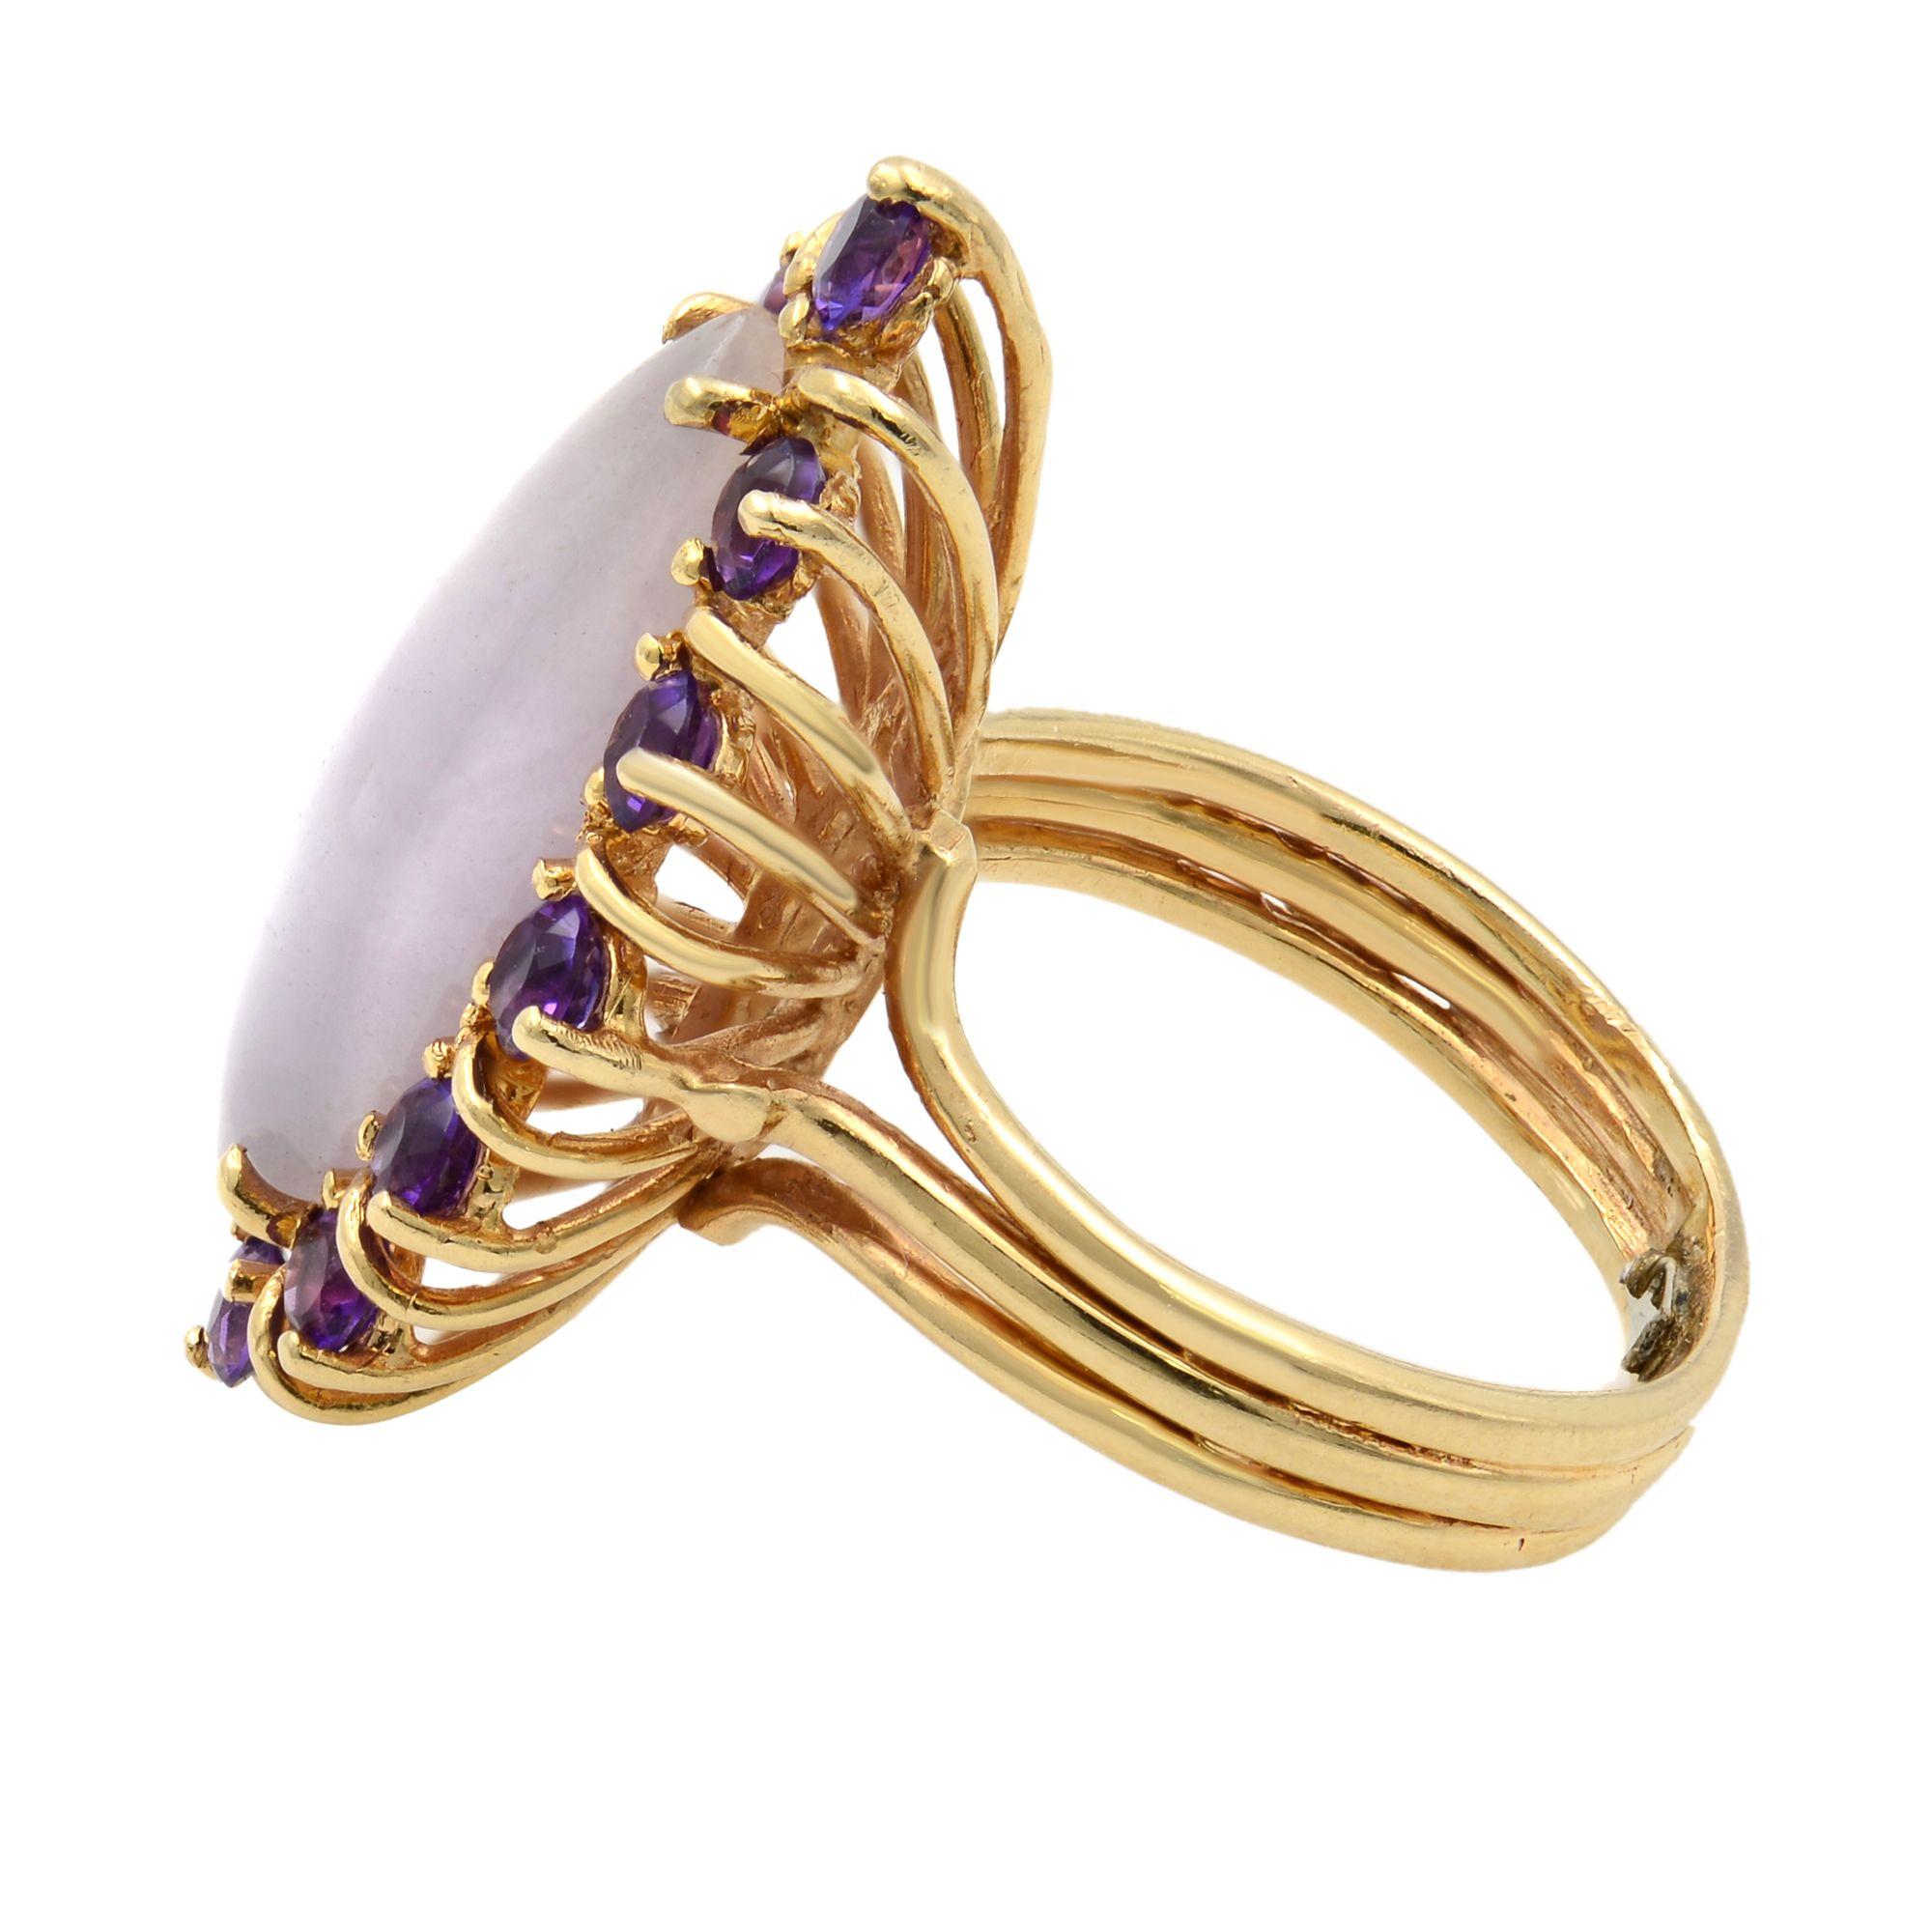 This Vintage piece of art is crafted in 14k yellow gold. It features an elegant marquise shape, natural Chalcedony gemstone with a halo of 12 round cut Amethyst gemstones. Top of the ring measurements: 28x15mm. Ring size 6. Comes with a presentable